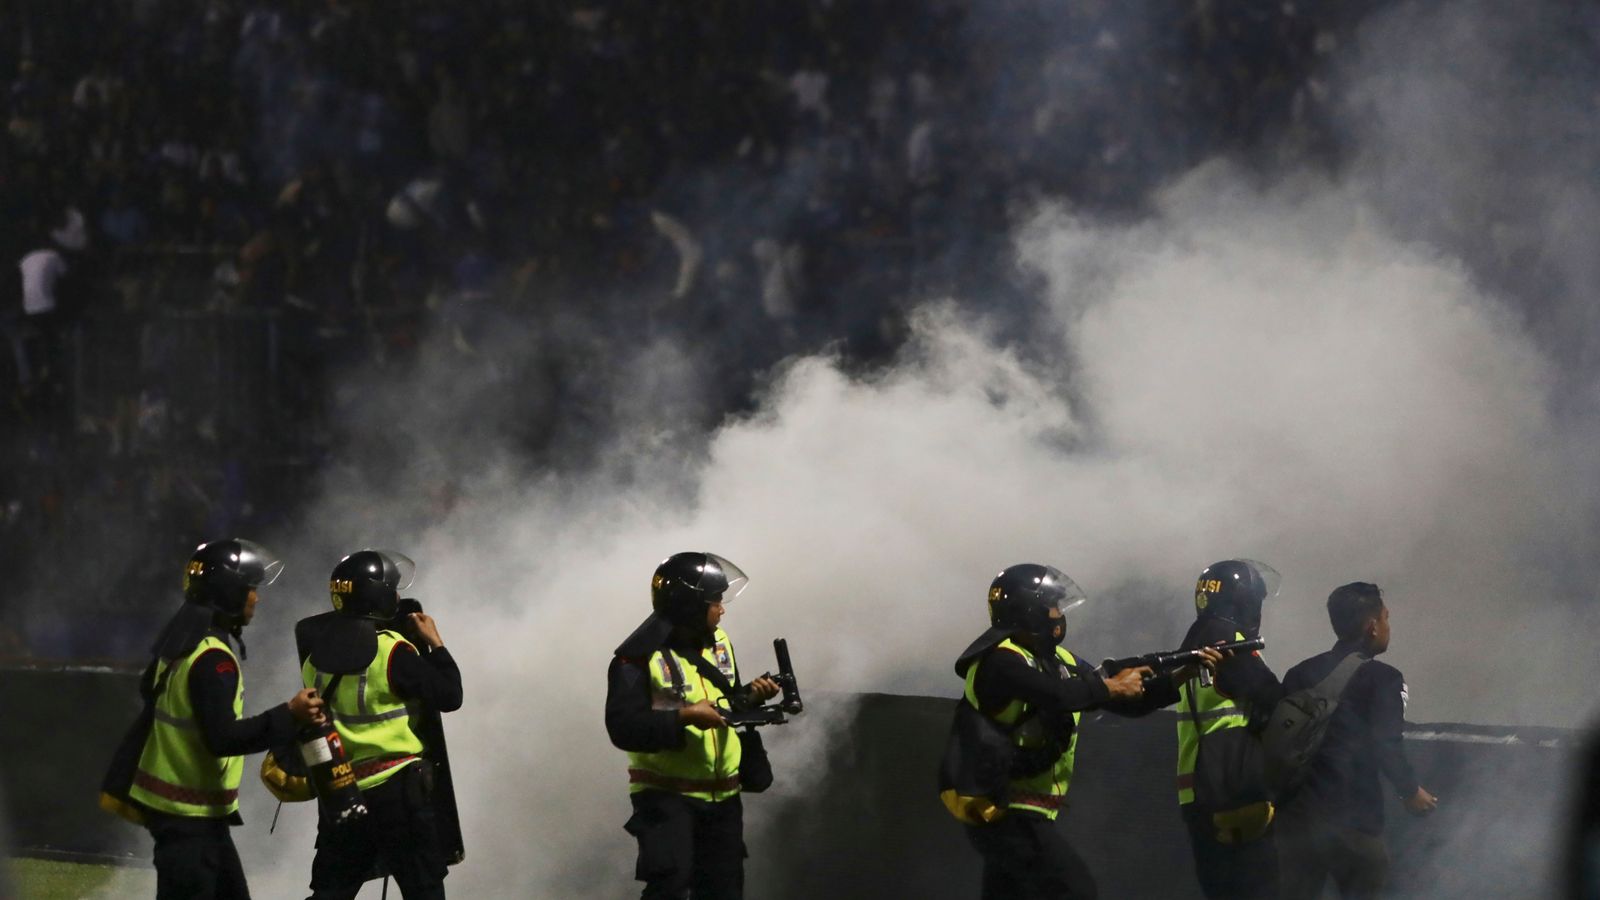 Police wrongly used tear gas at fatal Indonesian football match stampede, official says